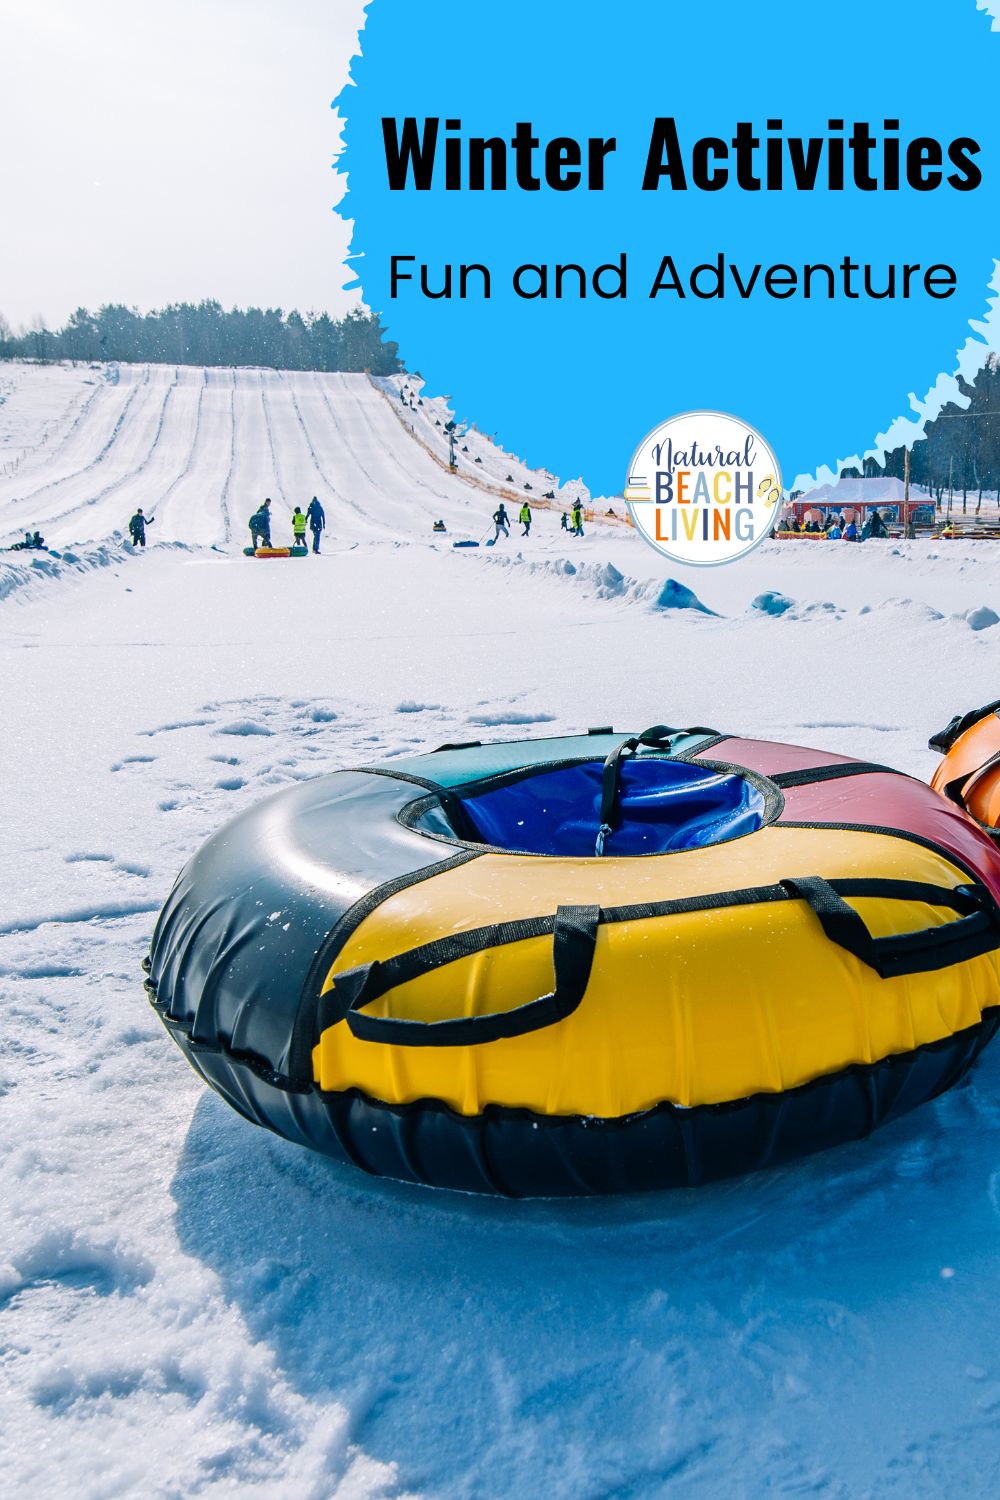 Whether you enjoy outdoor activities or inside activities, you can find so many fun Winter Activities and ideas here. Winter Activities to do with friends, family, or by yourself, these activities can be fun and enjoyable and create lasting memories.